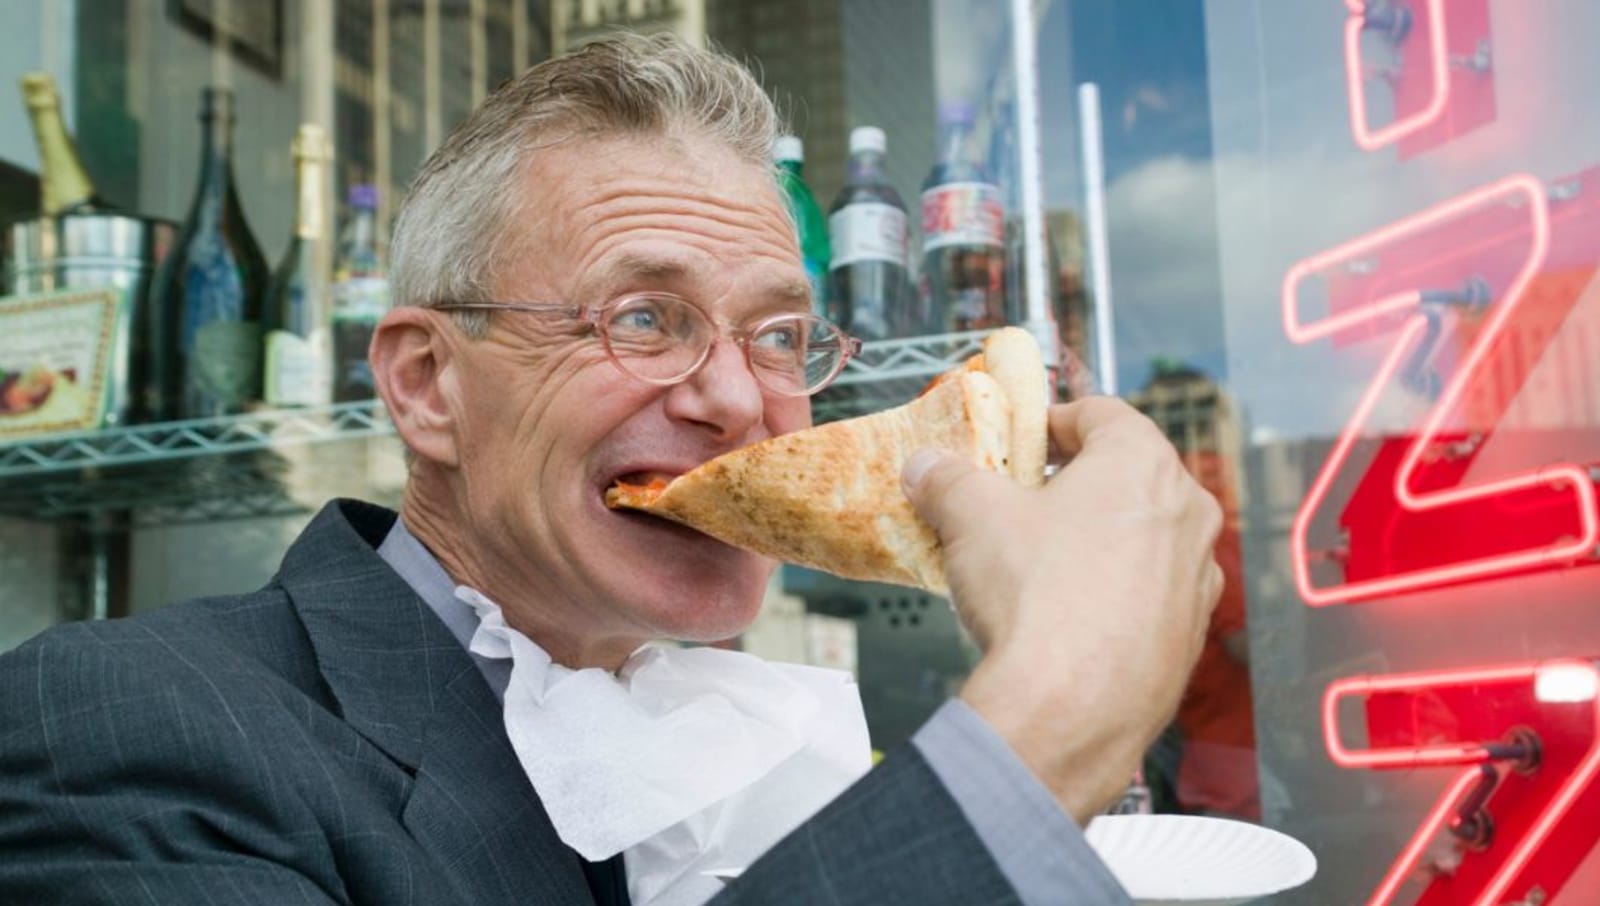 mature aged masc presenting person eats large piece of pizza 